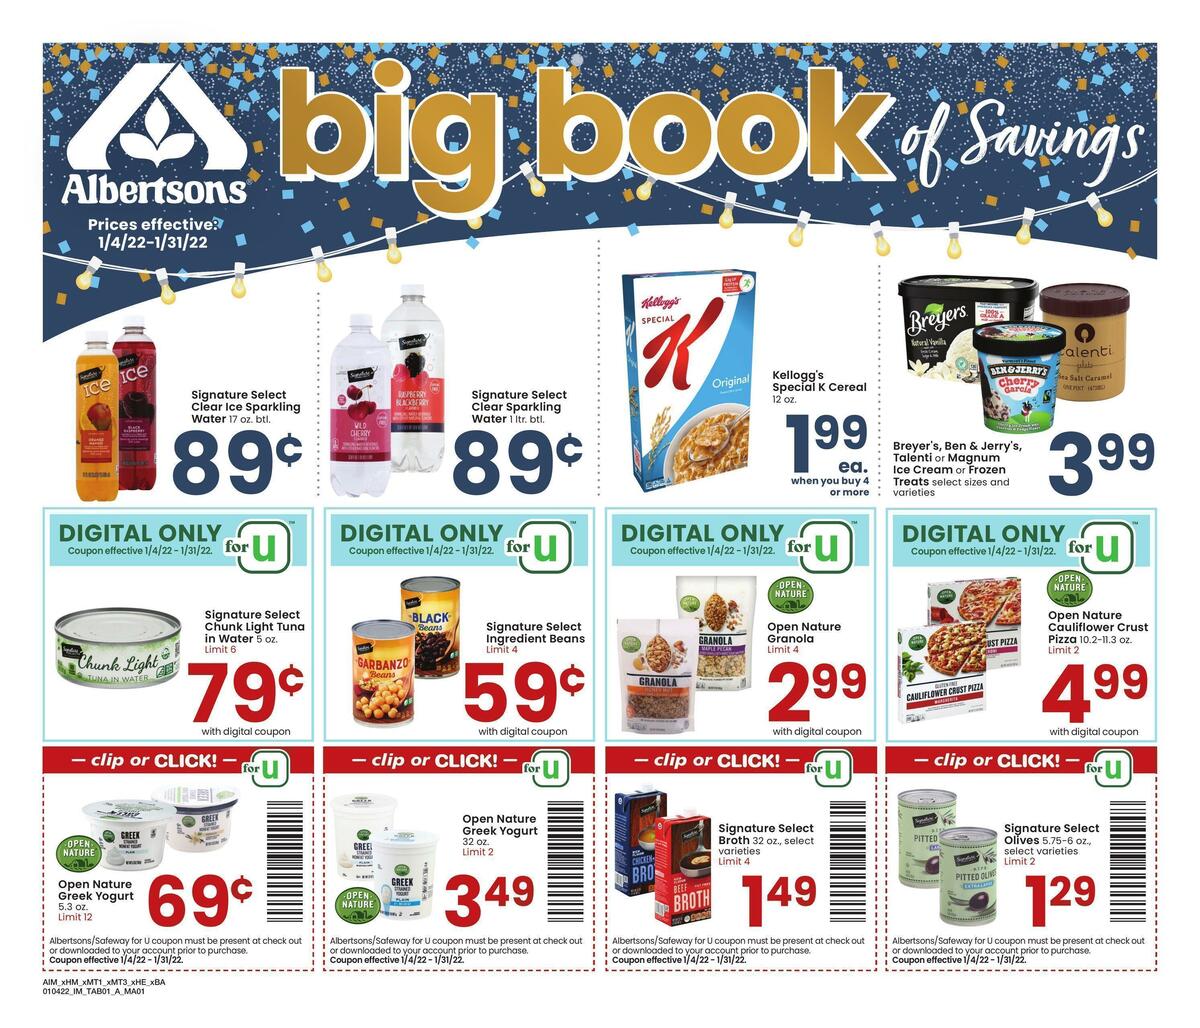 Albertsons Big Book of Savings Weekly Ad from January 4